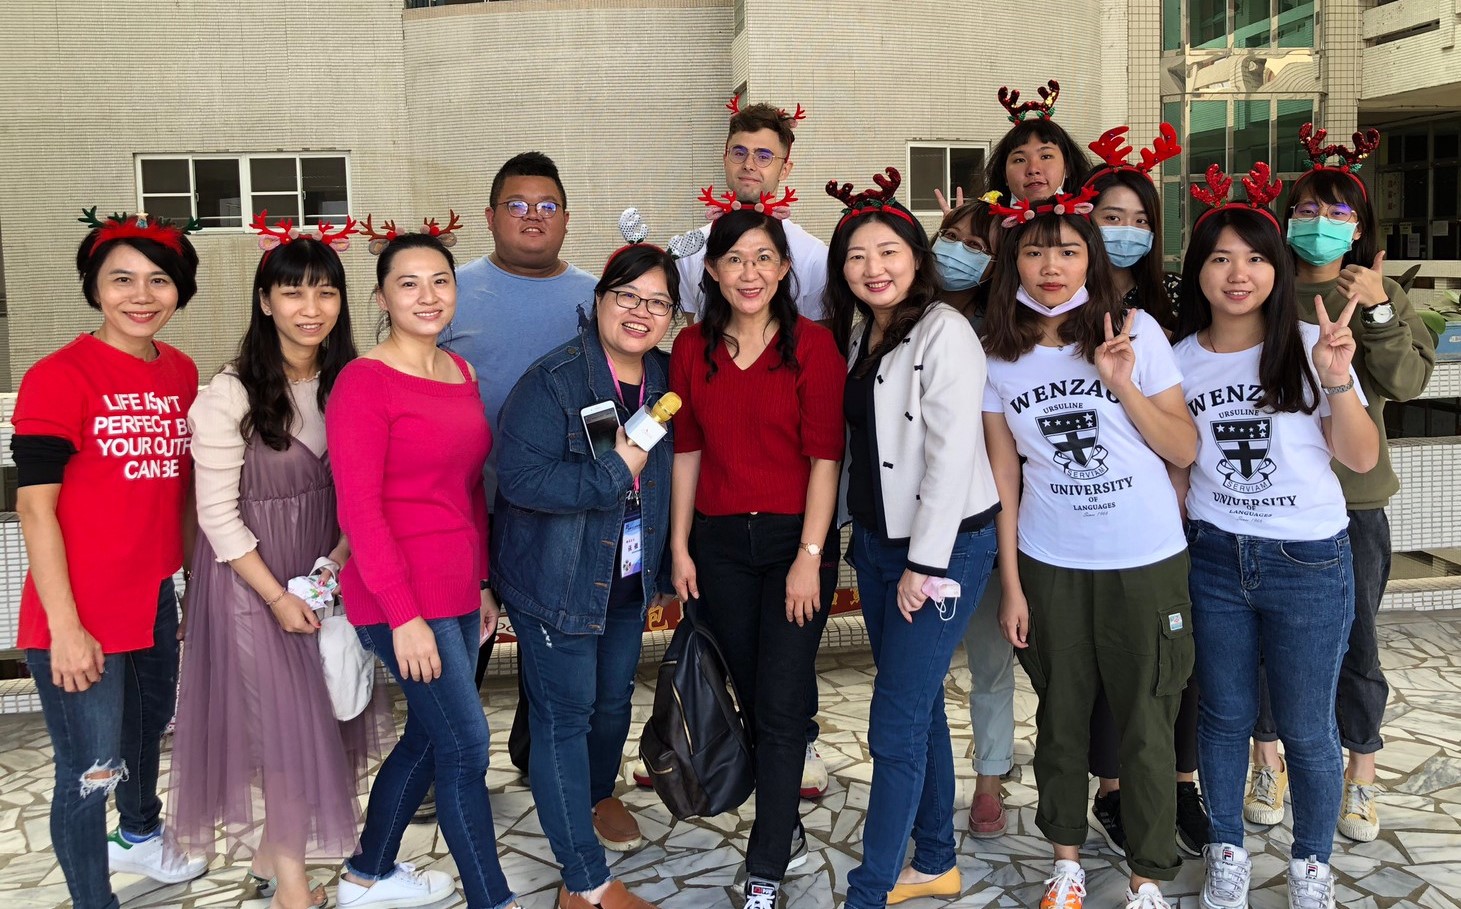 12/29/2020 Spice English up! College of English & International Studies of Wenzao Works with Lunghua Junior High School on English Teaching Program